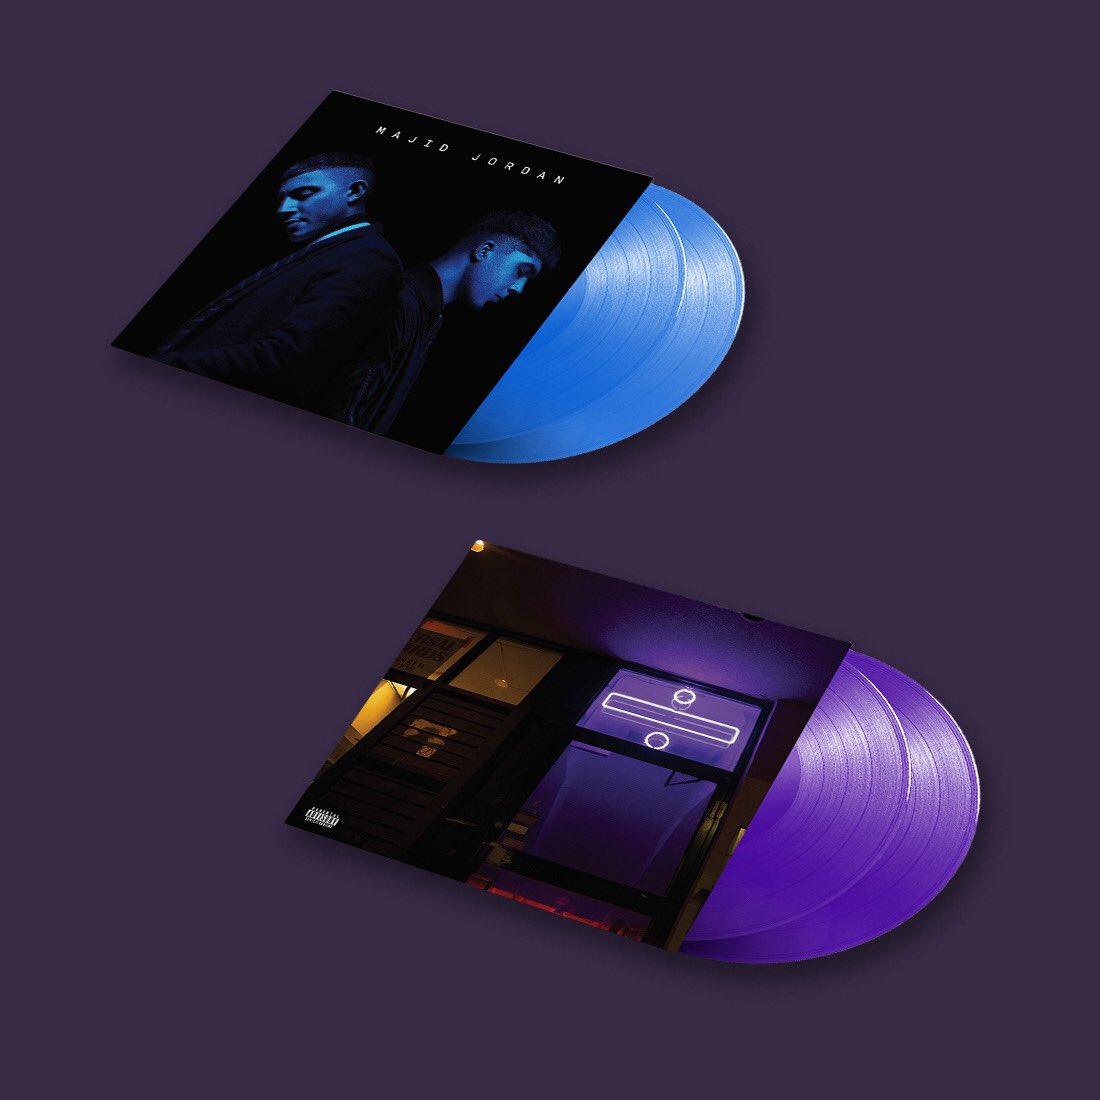 tabe Sodavand Tilsætningsstof OVO Sound on Twitter: "Limited edition “Majid Jordan” and “Sept 5th” vinyl  are available now worldwide on OVO Sound Shop! - https://t.co/hVaSMpDelJ  https://t.co/zLLIThqAyp" / Twitter